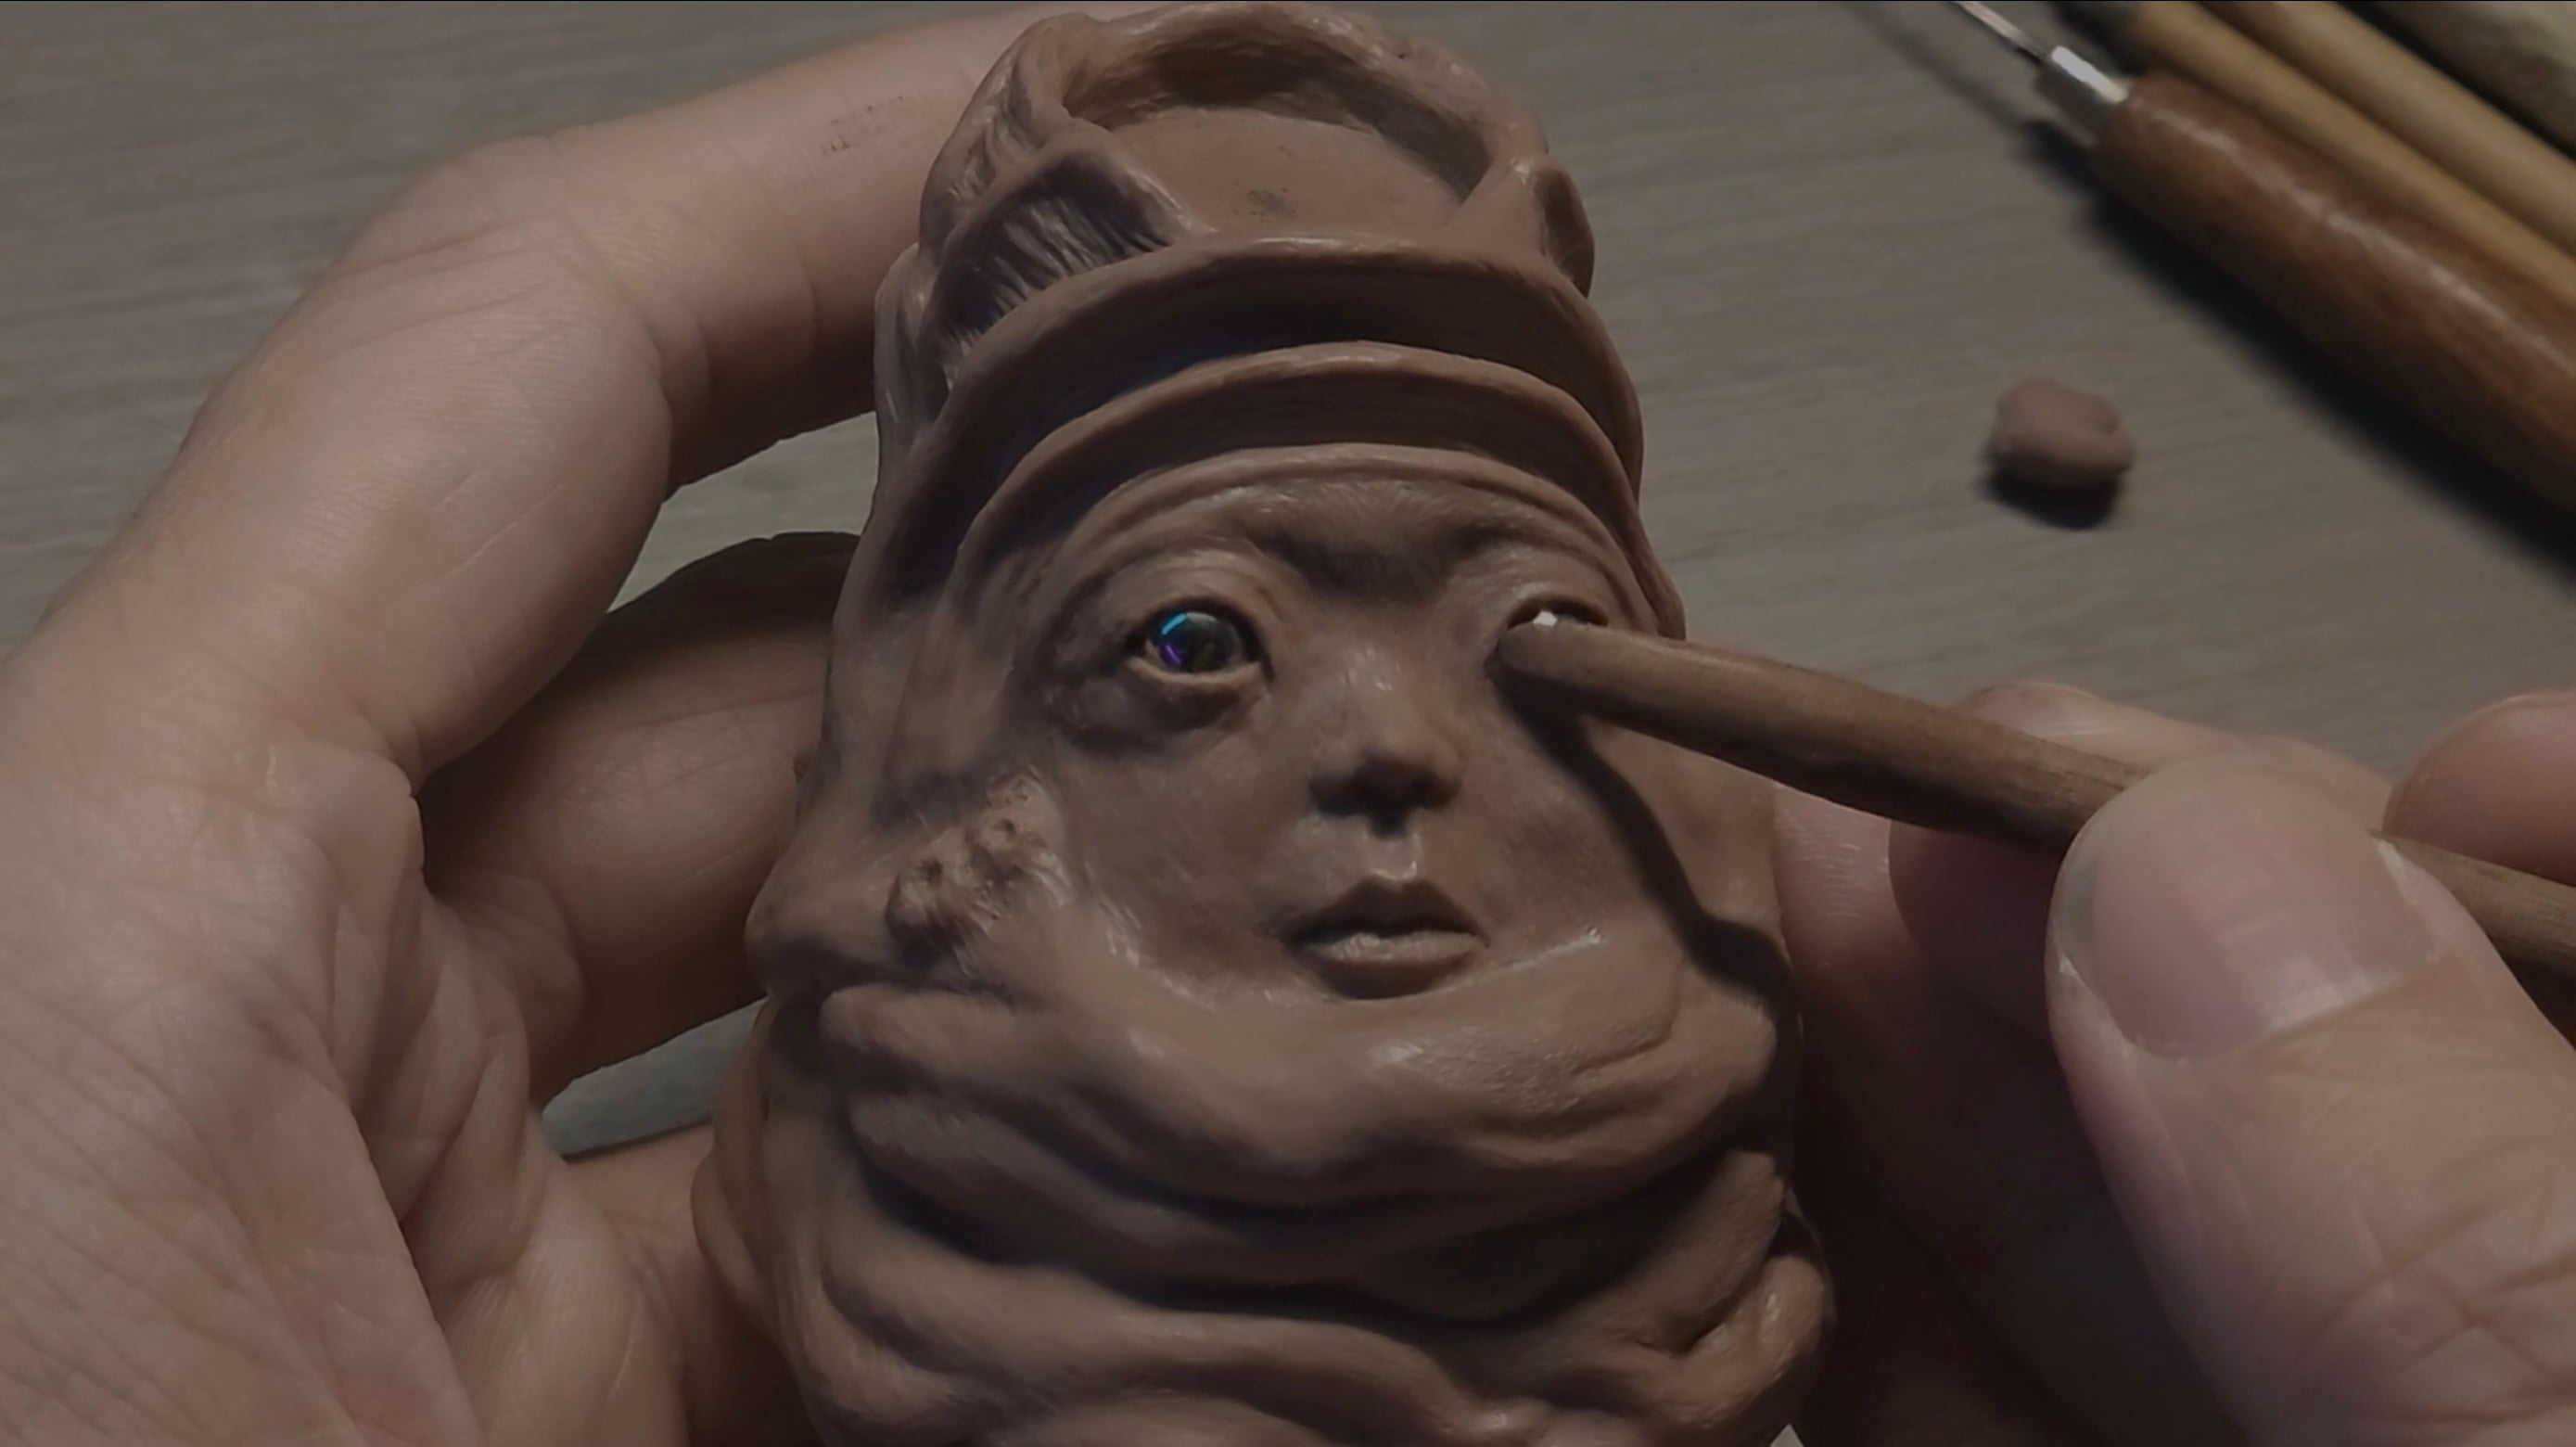 Load video: clay sculpting Diy incense holder for gift